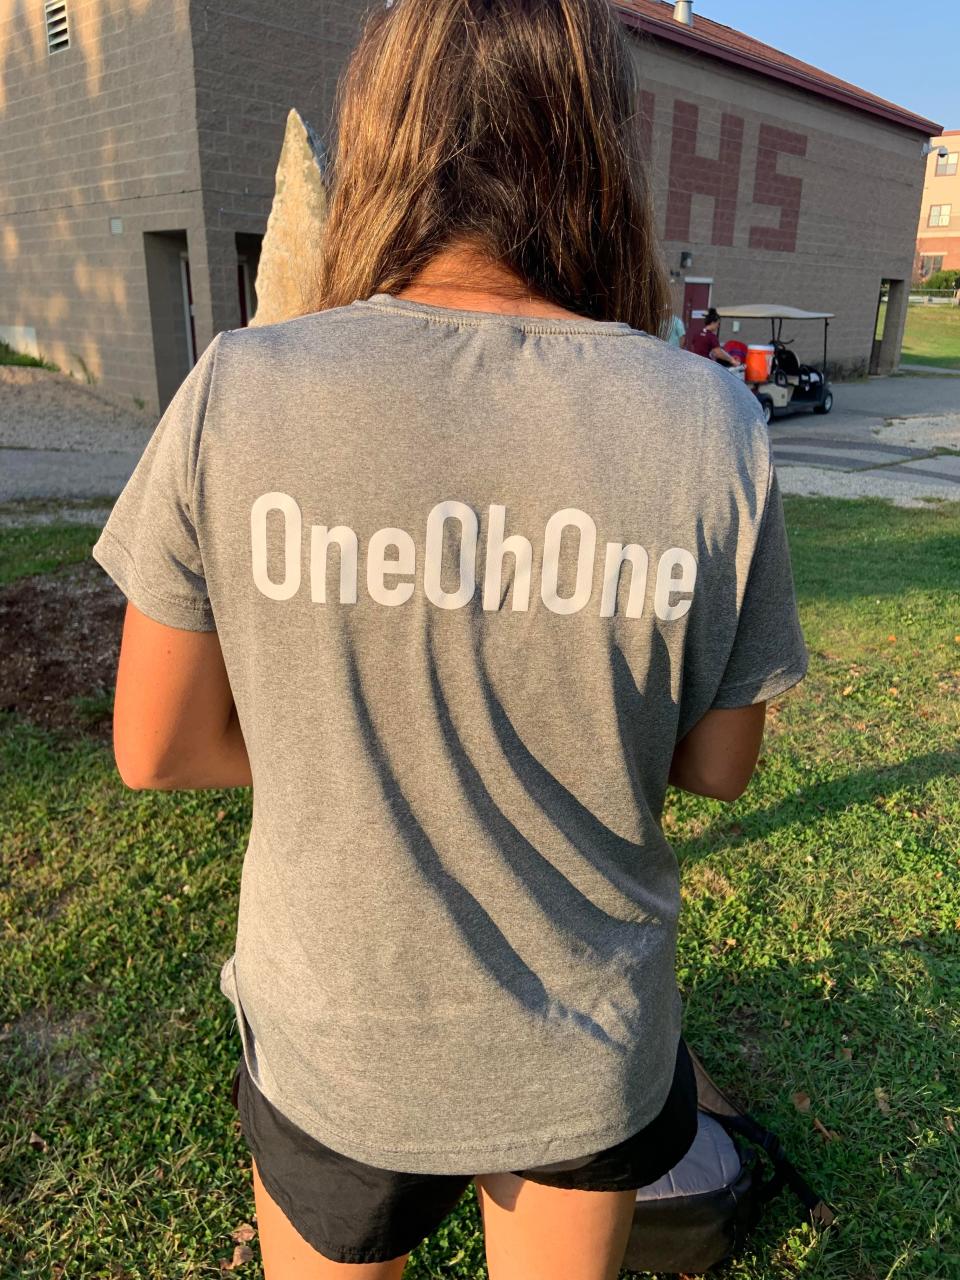 The motto of the Portsmouth High School girls soccer team is 'OneOhOne,' in reference to a stonecutter's credo that a stone will be broken into two on the 101st strike.